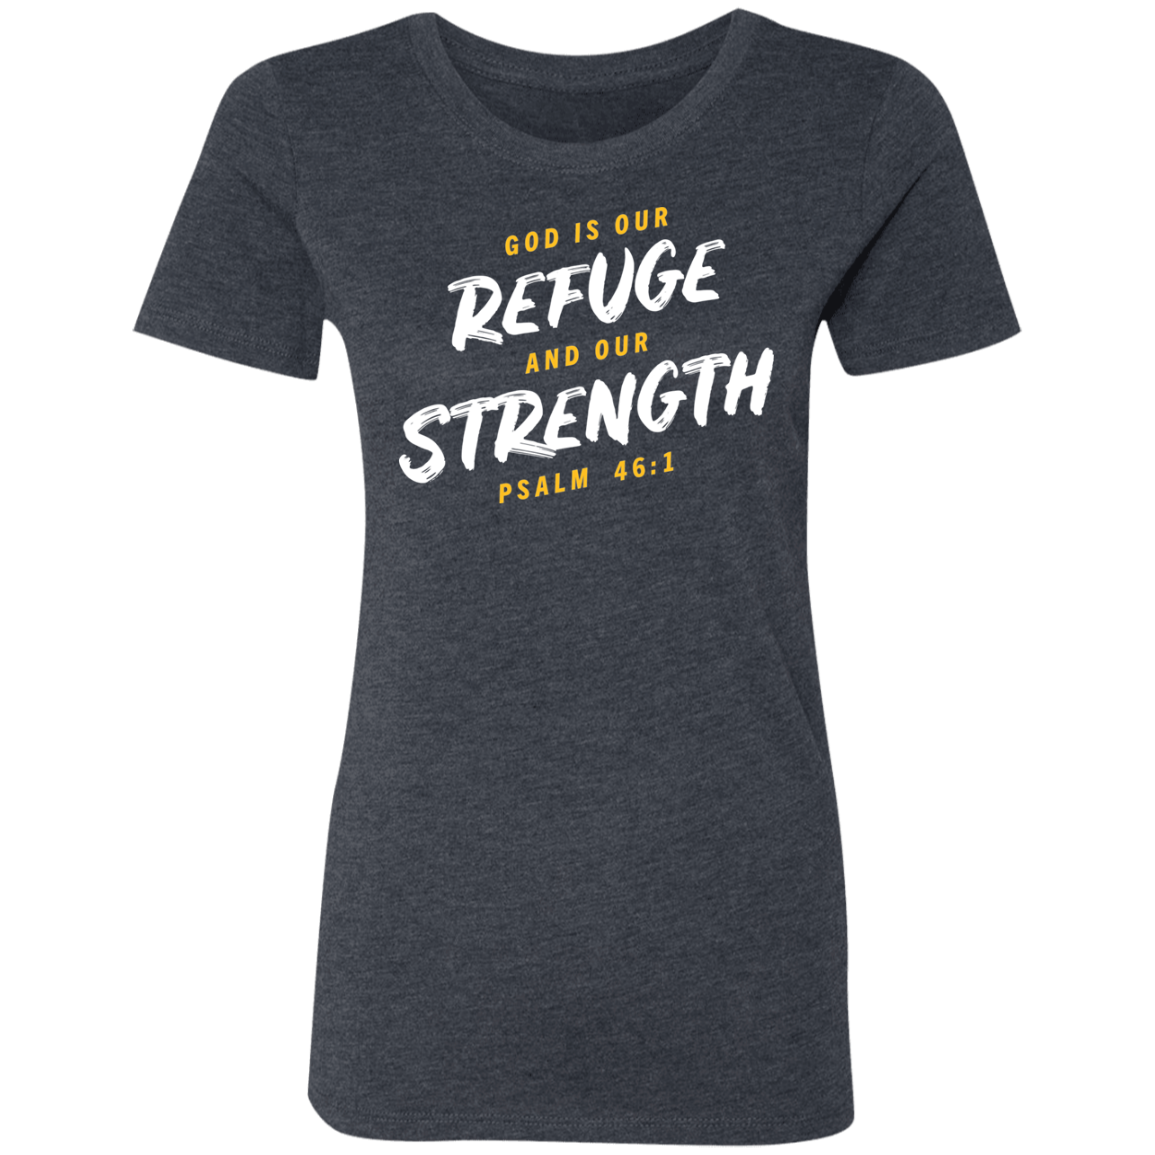 Refuge and Strength | Ladies’ Triblend T-Shirt